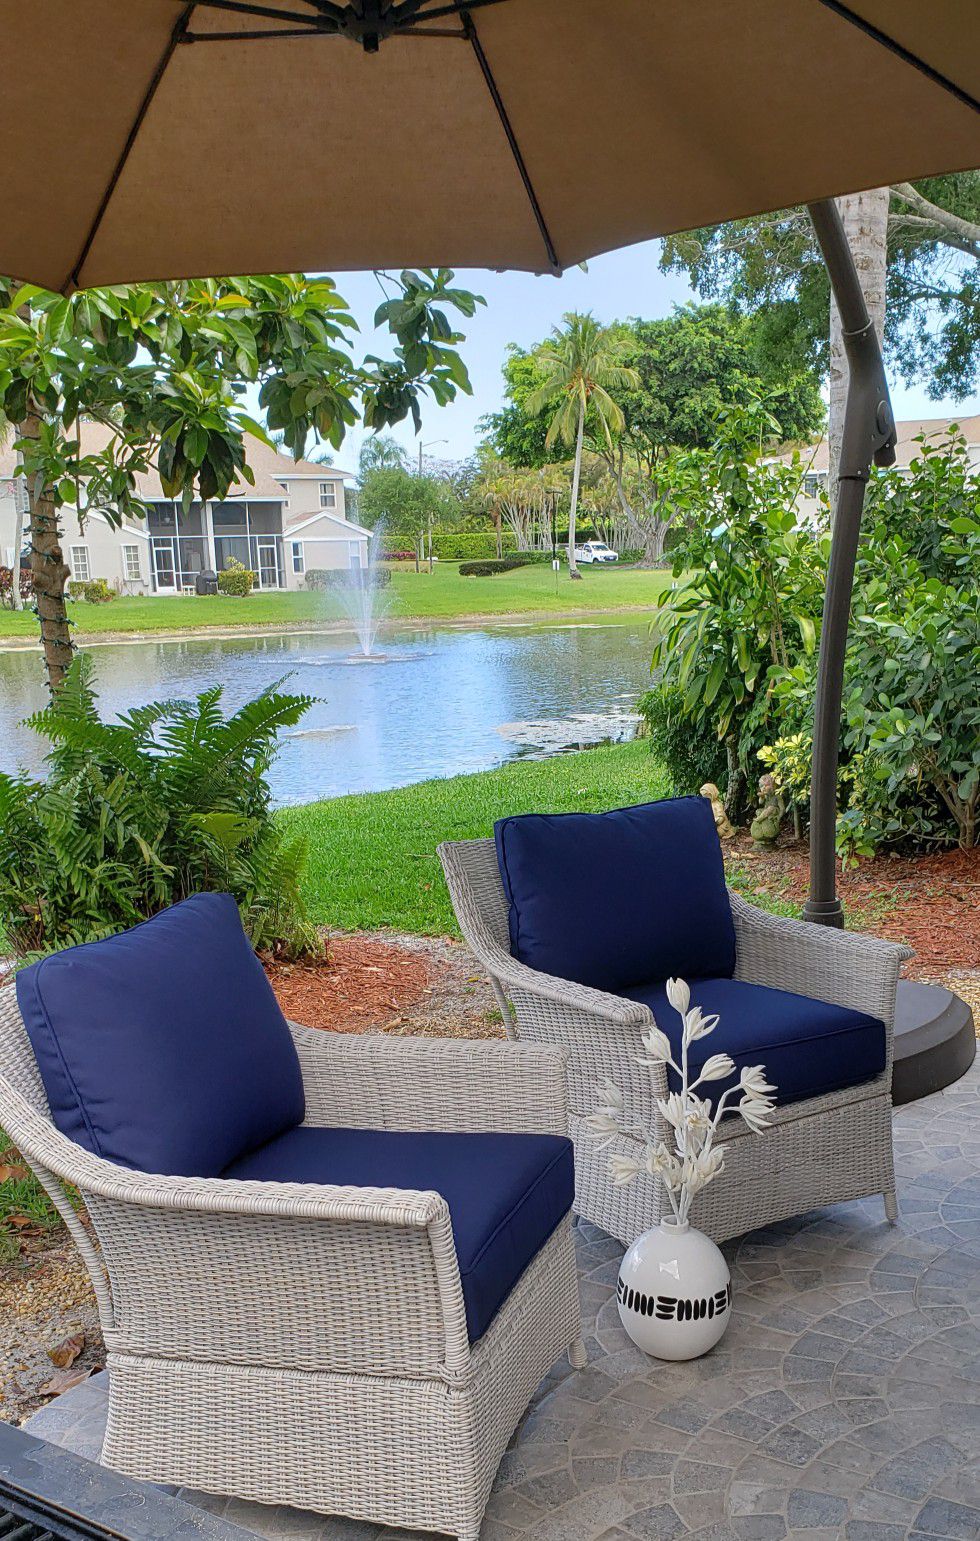 Two brand new large wicker patio club chairs with plush navy cushions